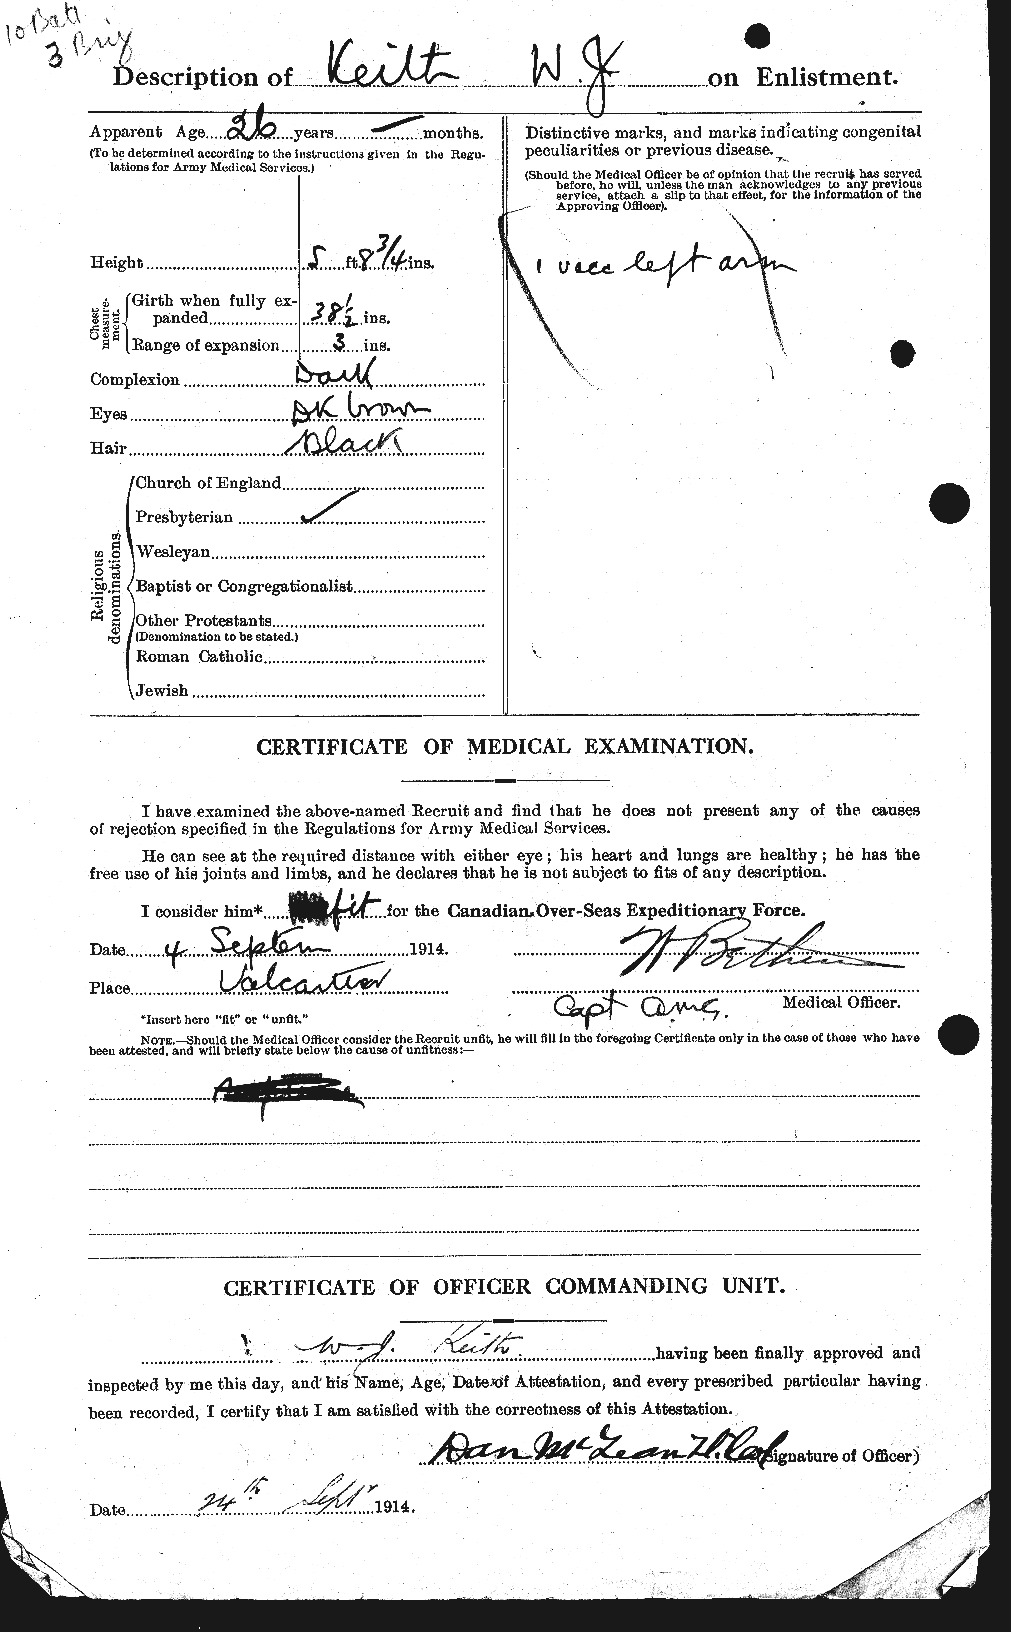 Personnel Records of the First World War - CEF 432519b